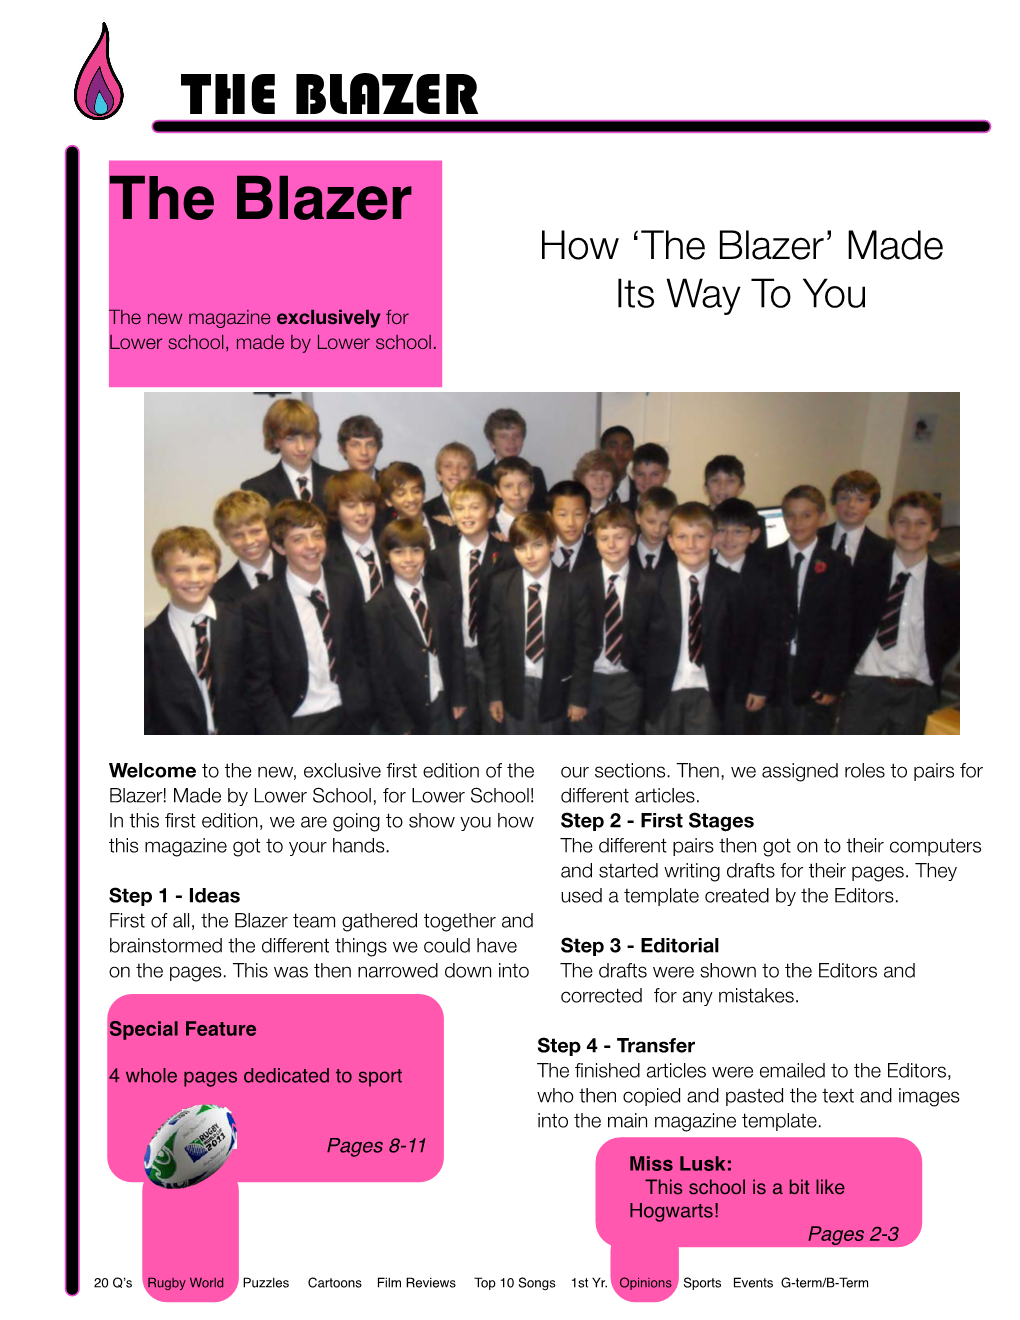 THE BLAZER the Blazer How ‘The Blazer’ Made Its Way to You the New Magazine Exclusively for Lower School, Made by Lower School